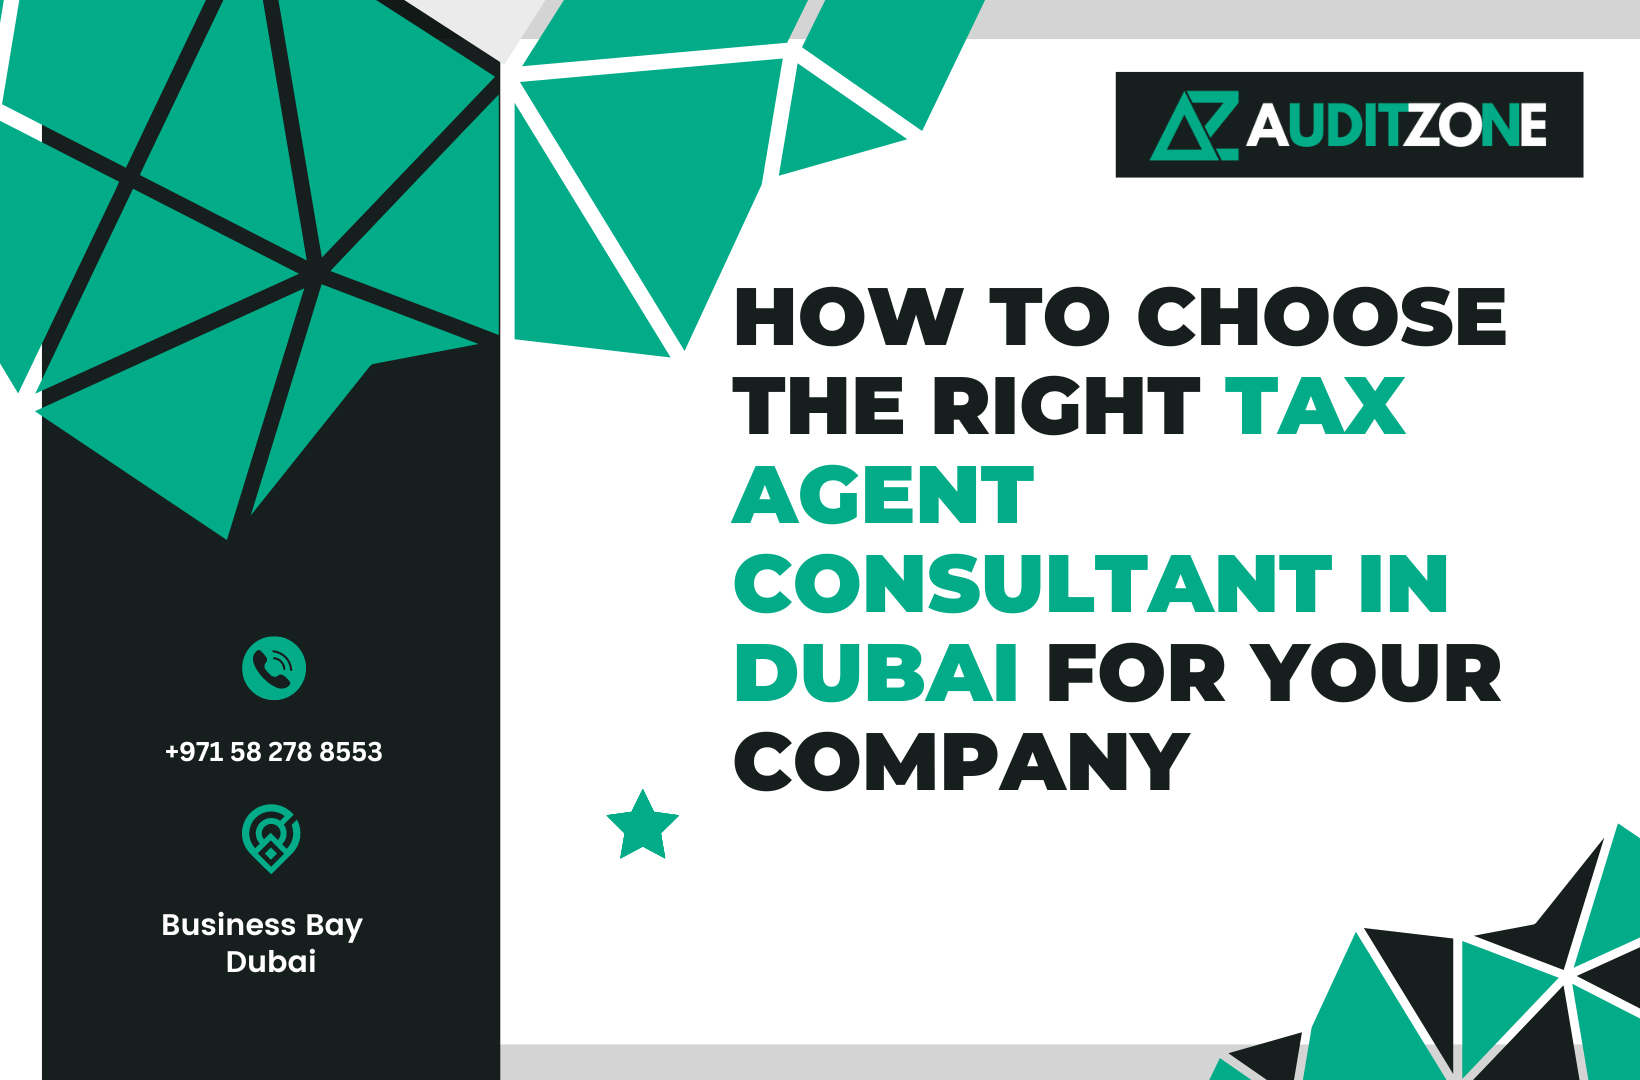 How to Choose the Right Tax Agent Consultant in Dubai for Your Company